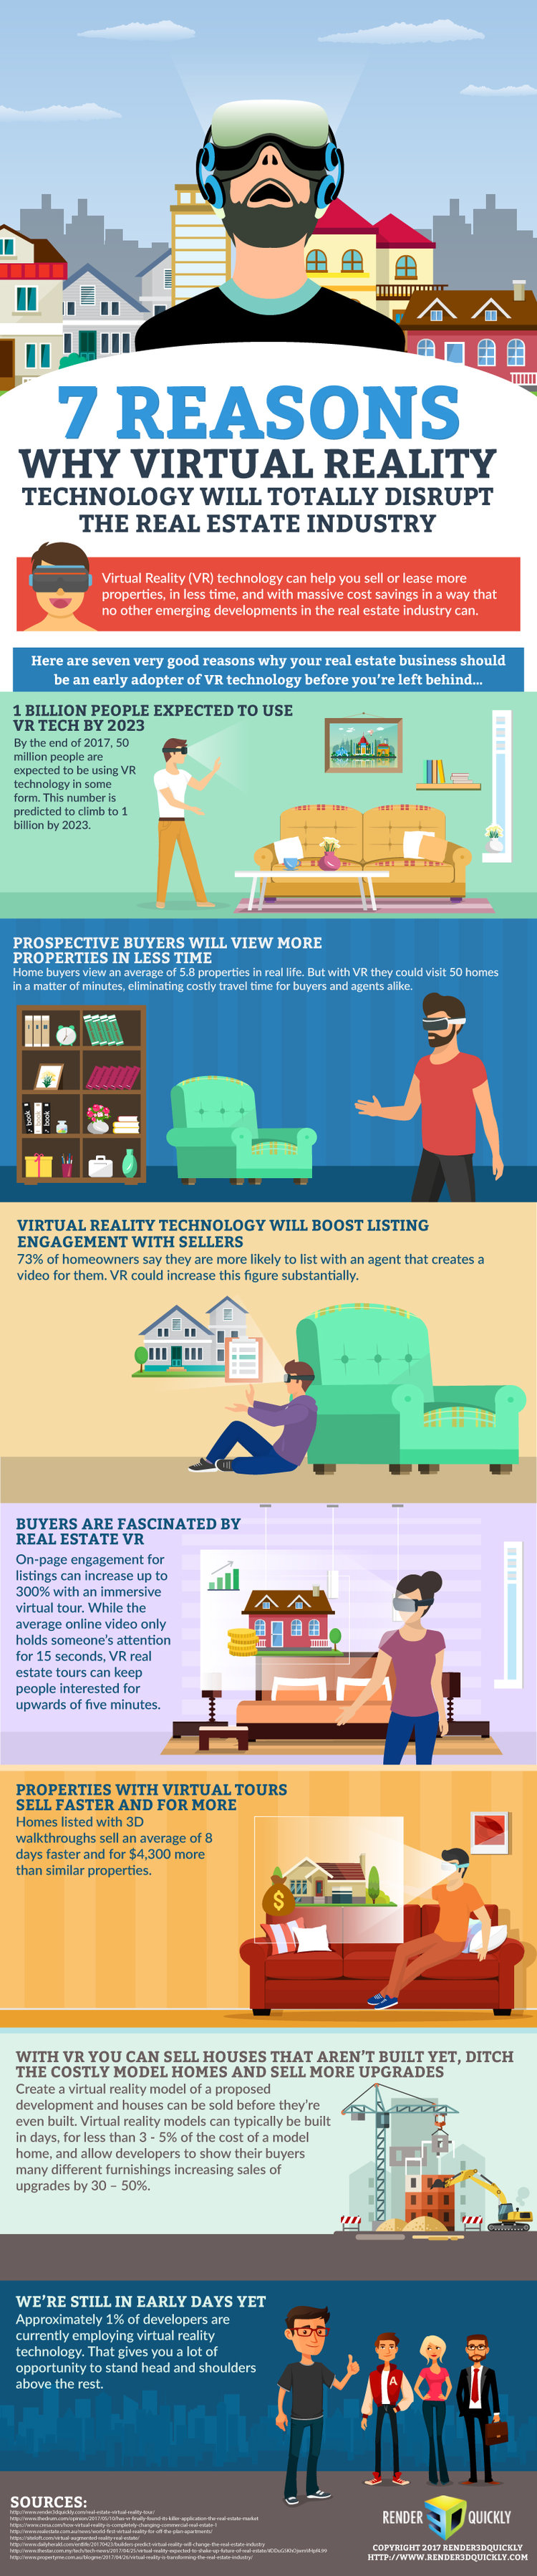 7 Reasons Why Virtual Reality Technology Will Totally Disrupt the Real Estate Industry